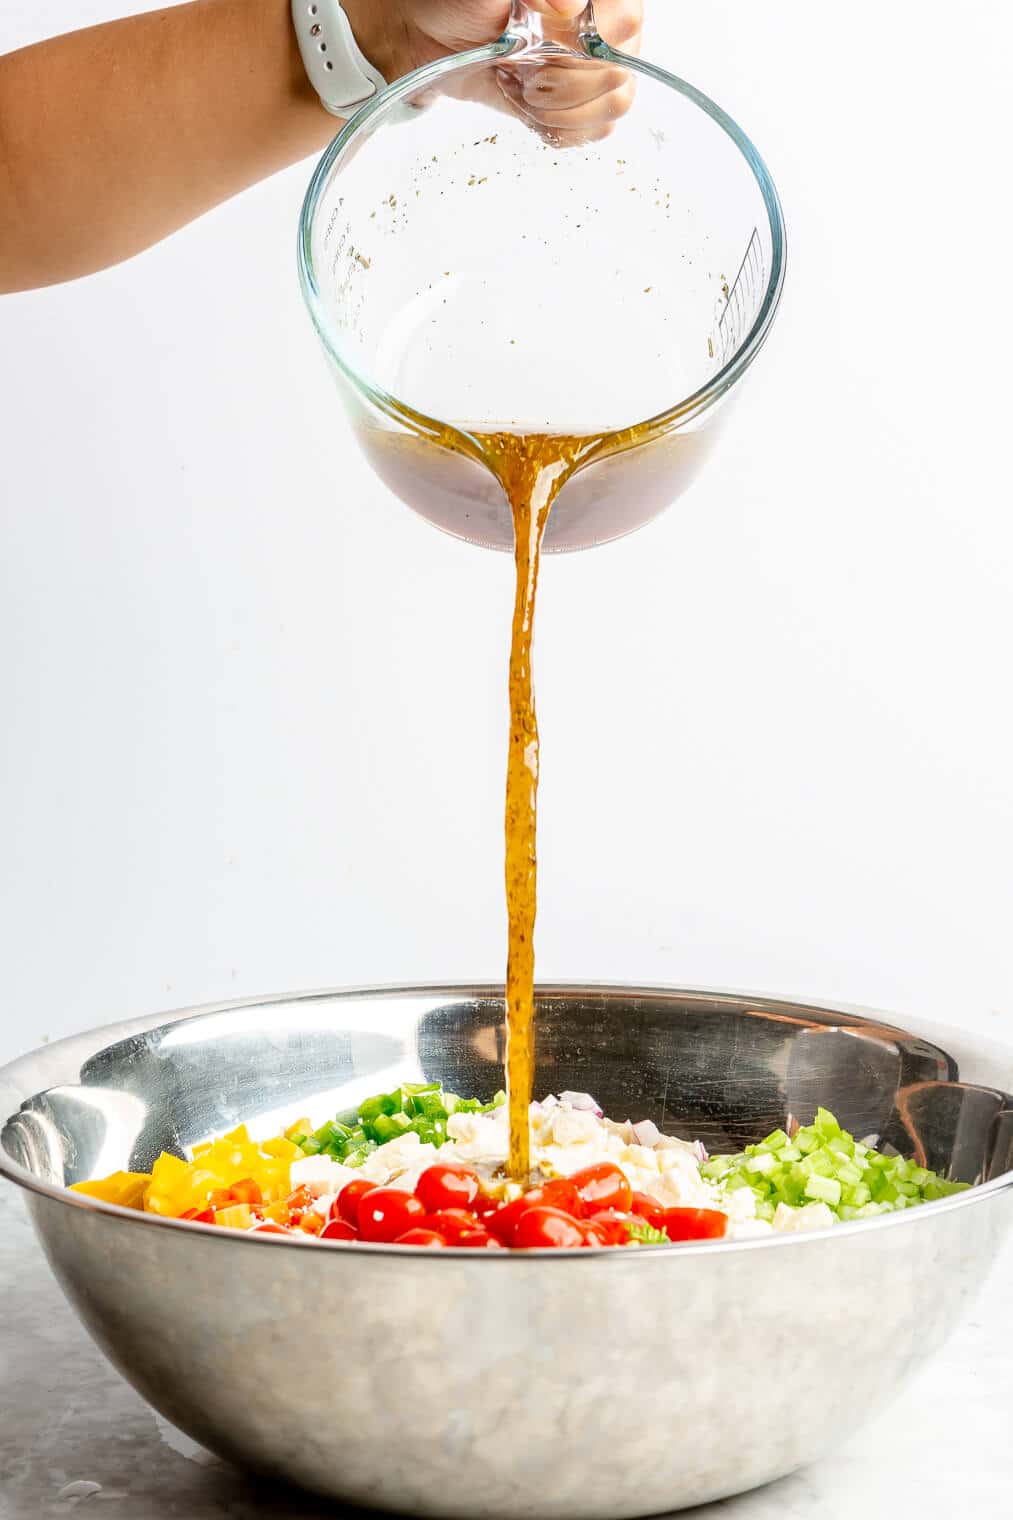 A person pouring homemade dressing into a large metal bowl to make Italian pasta salad.